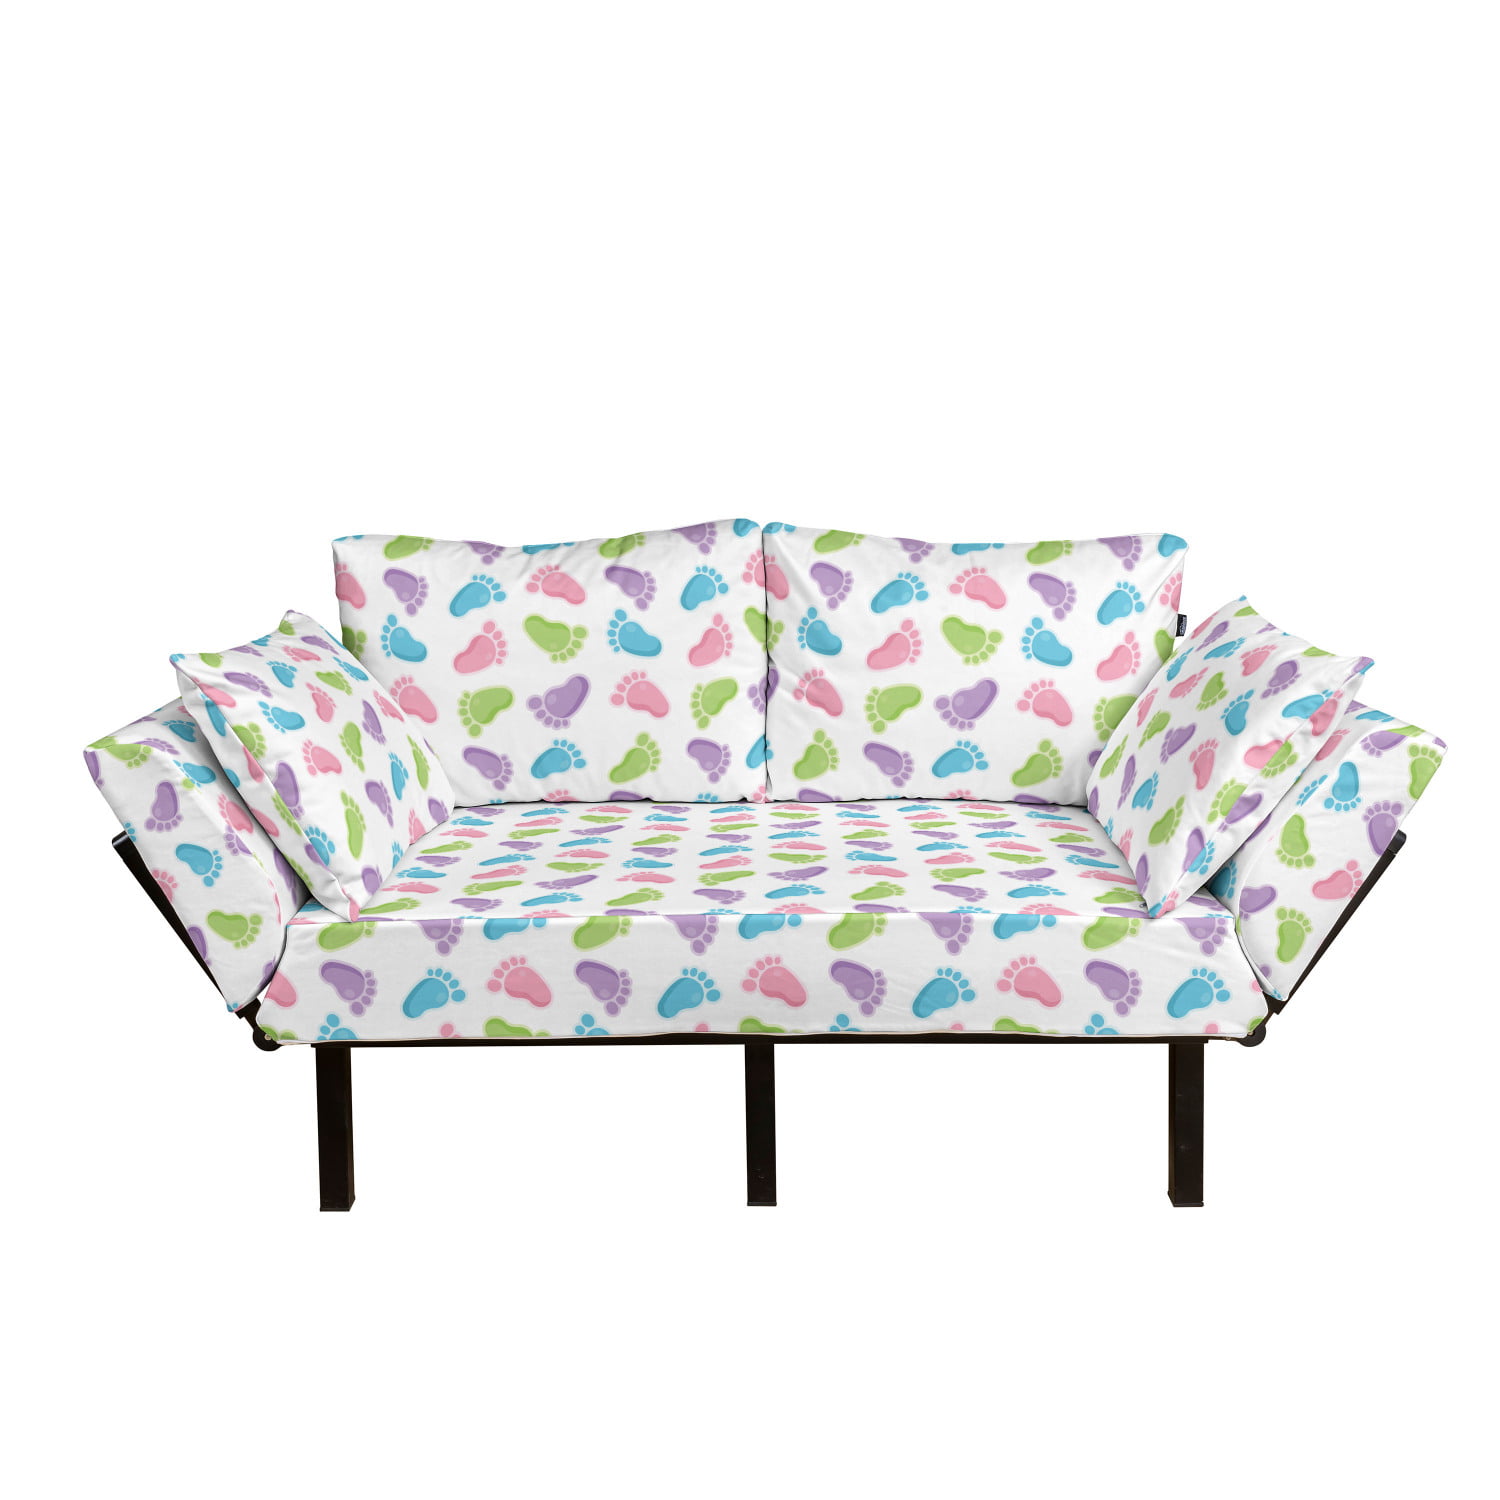 Loveseat Ambesonne Cactus Futon Couch Vintage Inspired Watercolor Pattern Latin American Foliage Peyote Design Elements Multicolor Daybed with Metal Frame Upholstered Sofa for Living Dorm